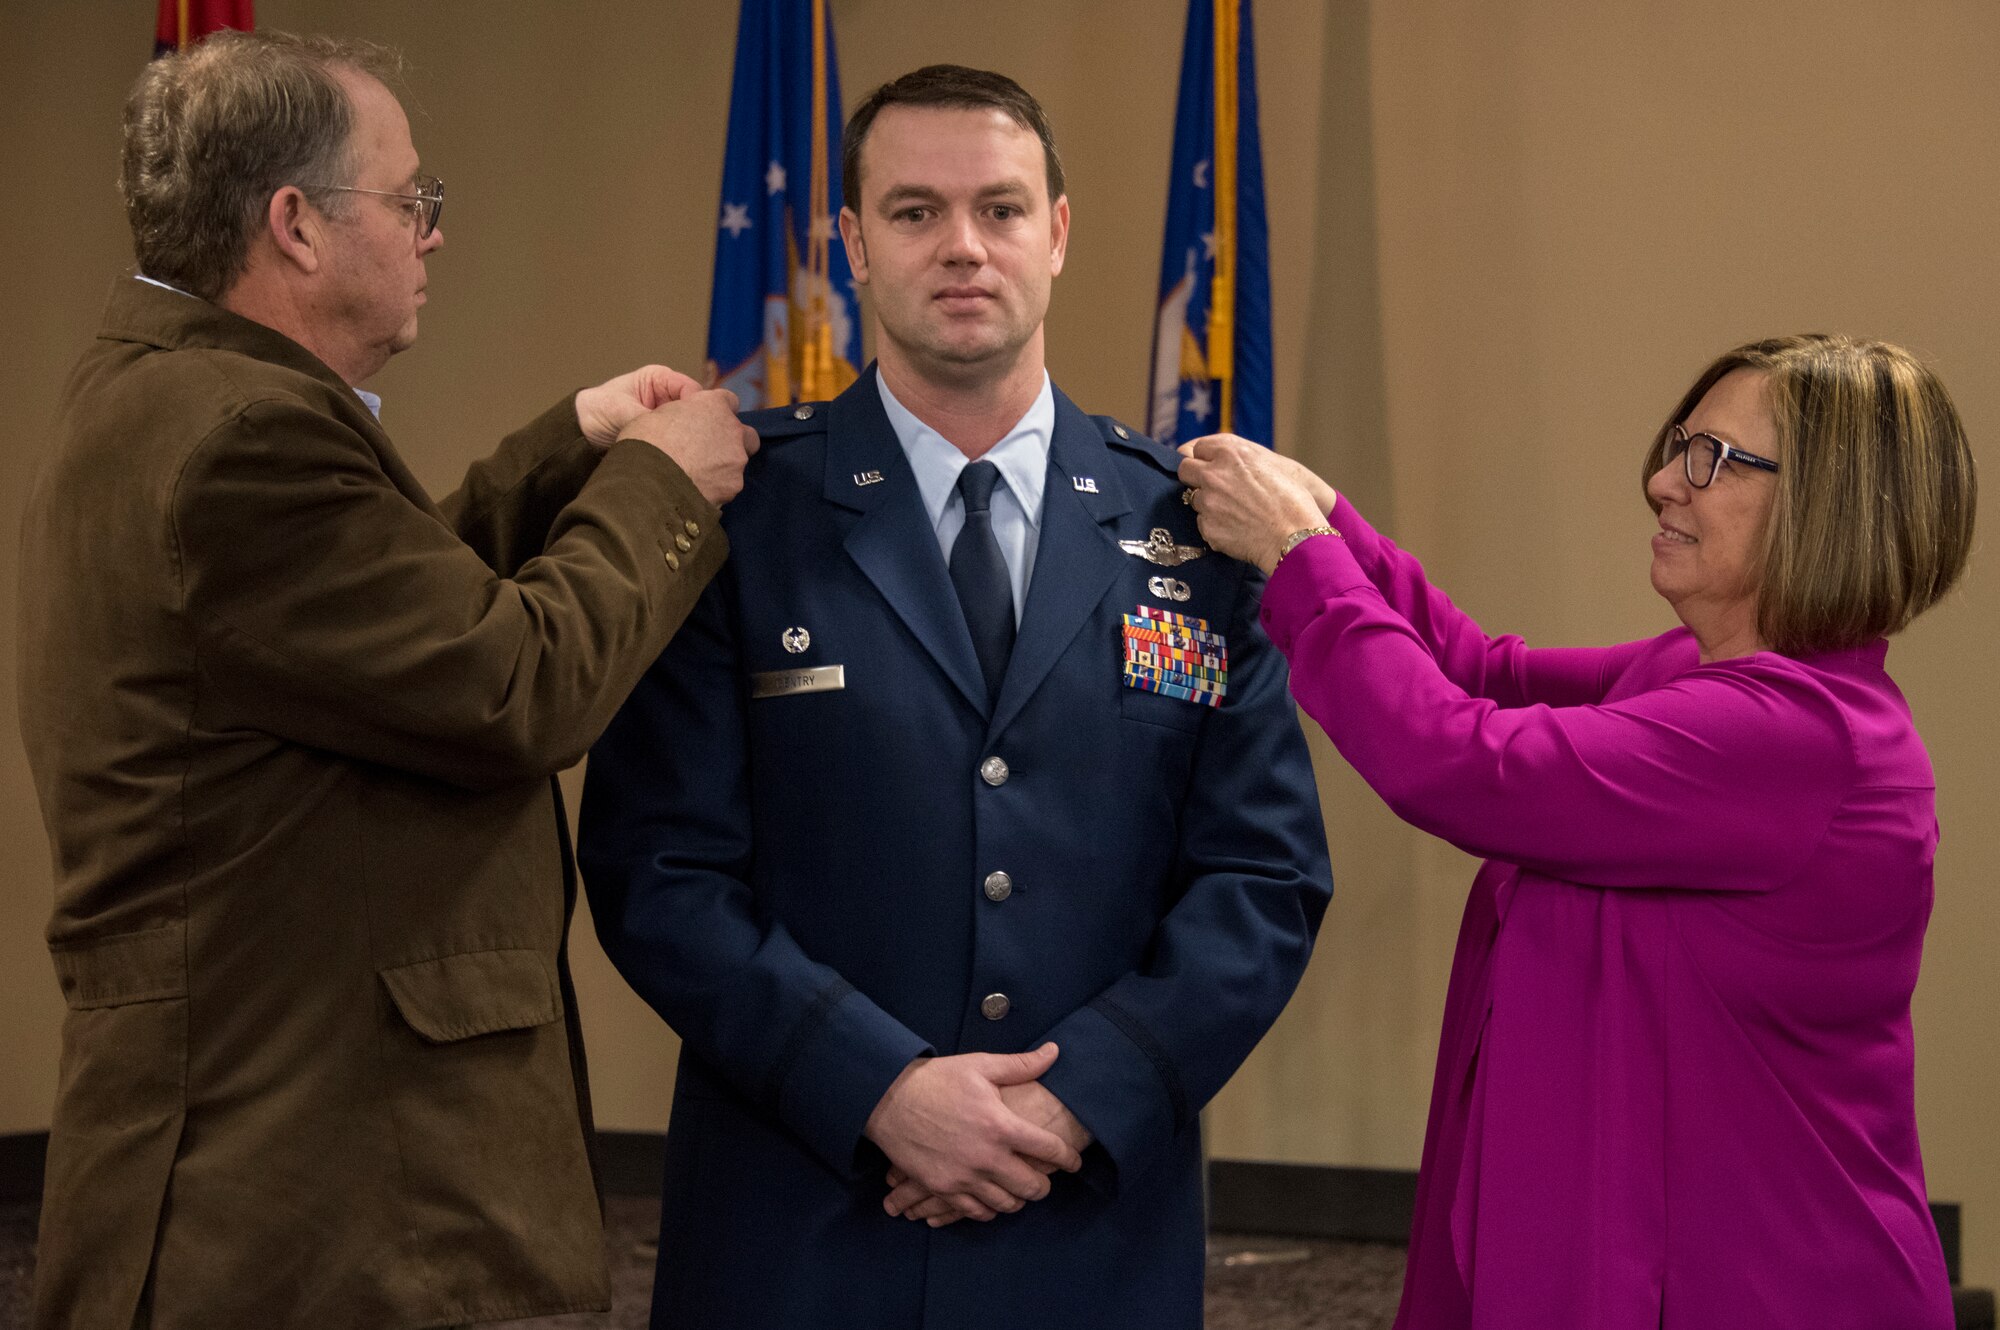 Col. Jeremiah S. Gentry, 188th Operations Group commander, has his new rank pinned on by friends and family during his promotion ceremony at Ebbing Air National Guard Base, Fort Smith, Ark., Feb. 2, 2019. Gentry has been a 188th Wing member since 2011 and was instrumental in the establishment of its MQ-9 remotely piloted aircraft mission. (U.S. Air National Guard photo by Tech. Sgt. Daniel Condit)